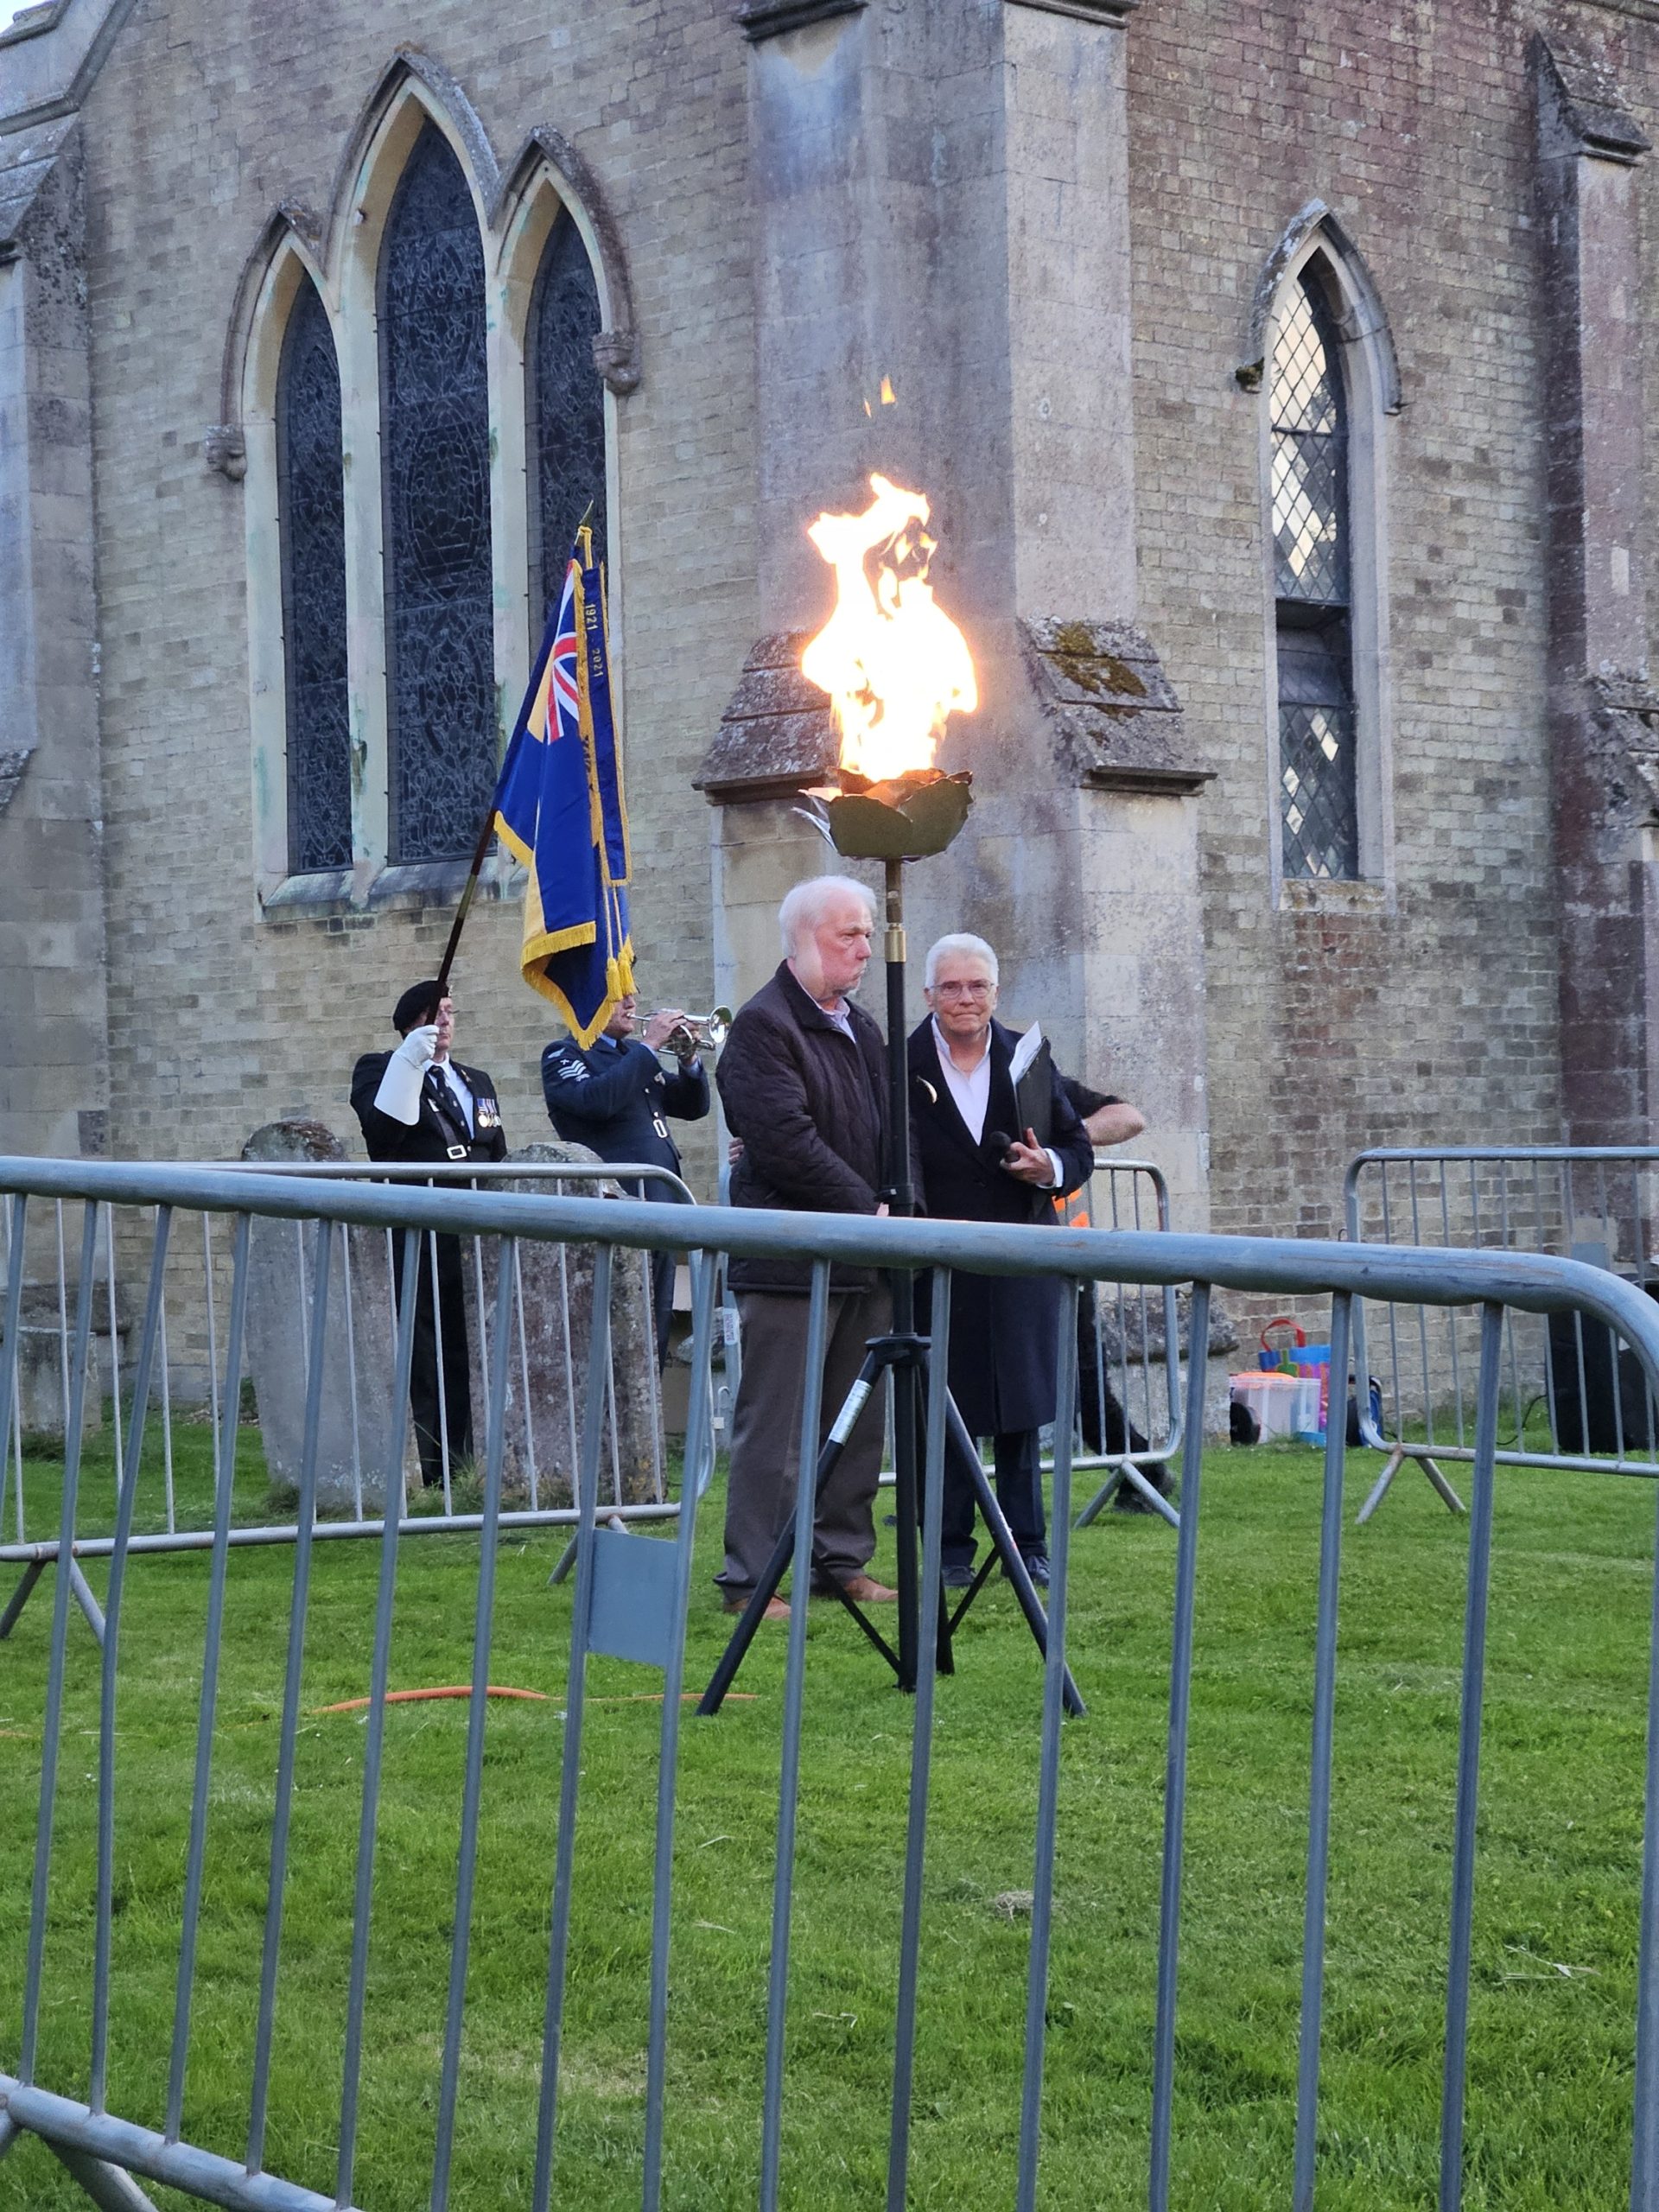 Freeman, Roy Reeves and Chair S Withams standing for a moments silence following the lighting of the beacon. 
